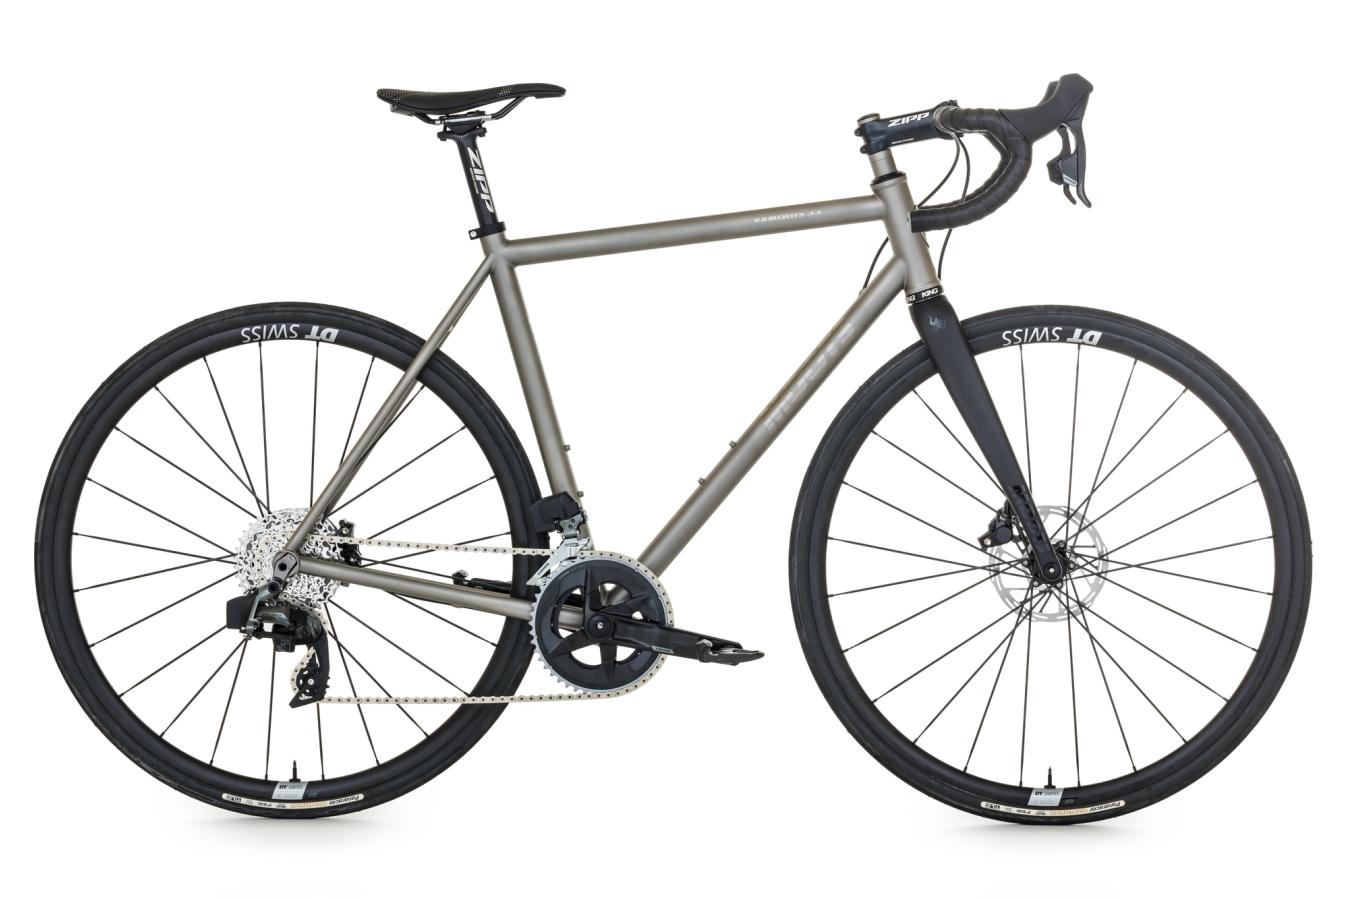 Complete builds start from $7,499 for a SRAM Rival AXS equipped model